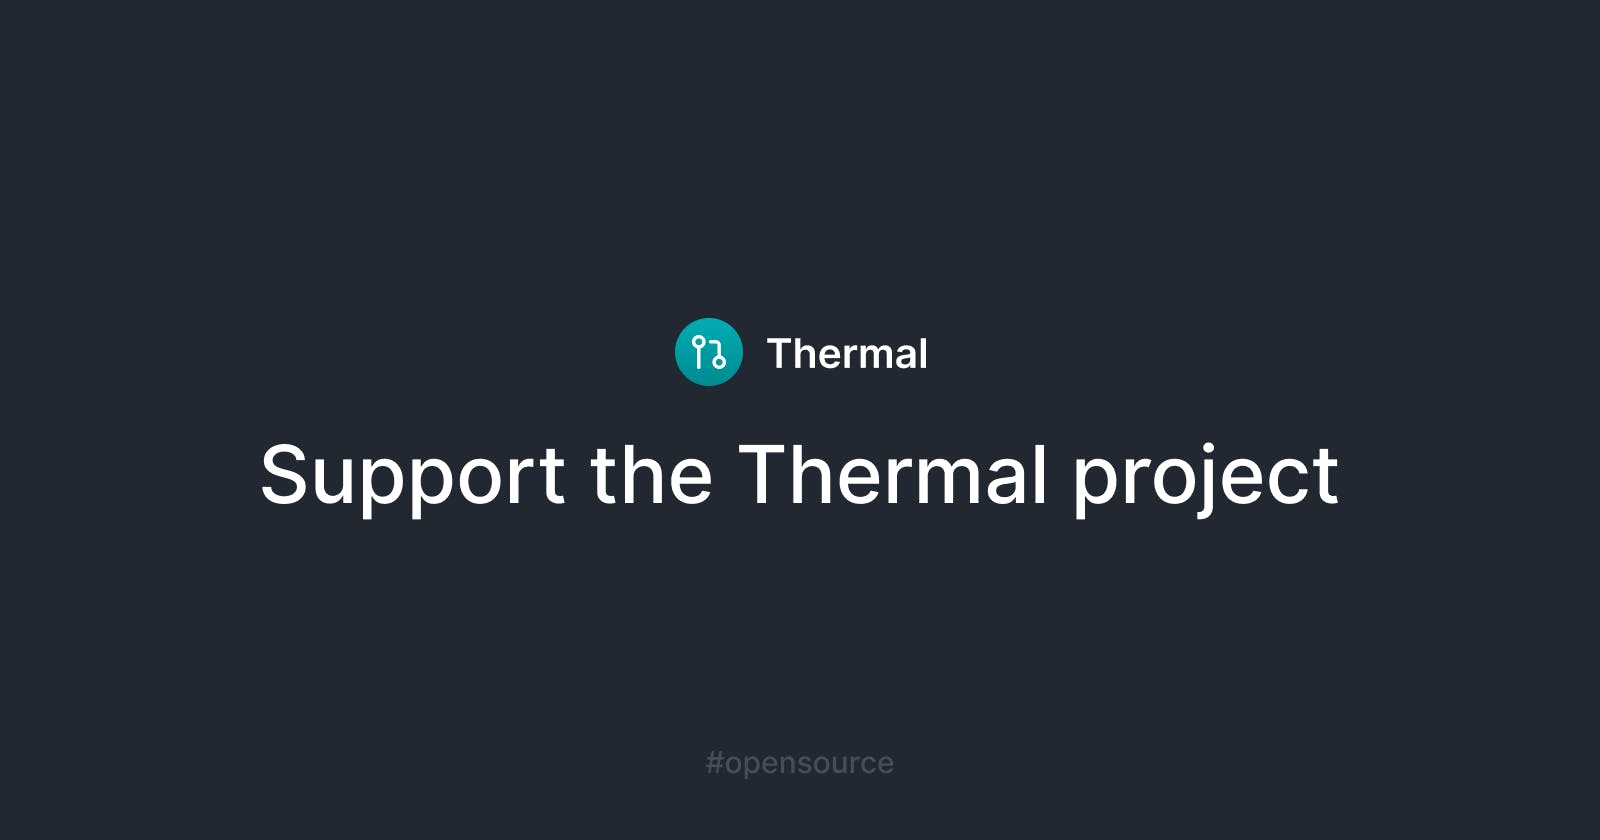 Support the Thermal open source project